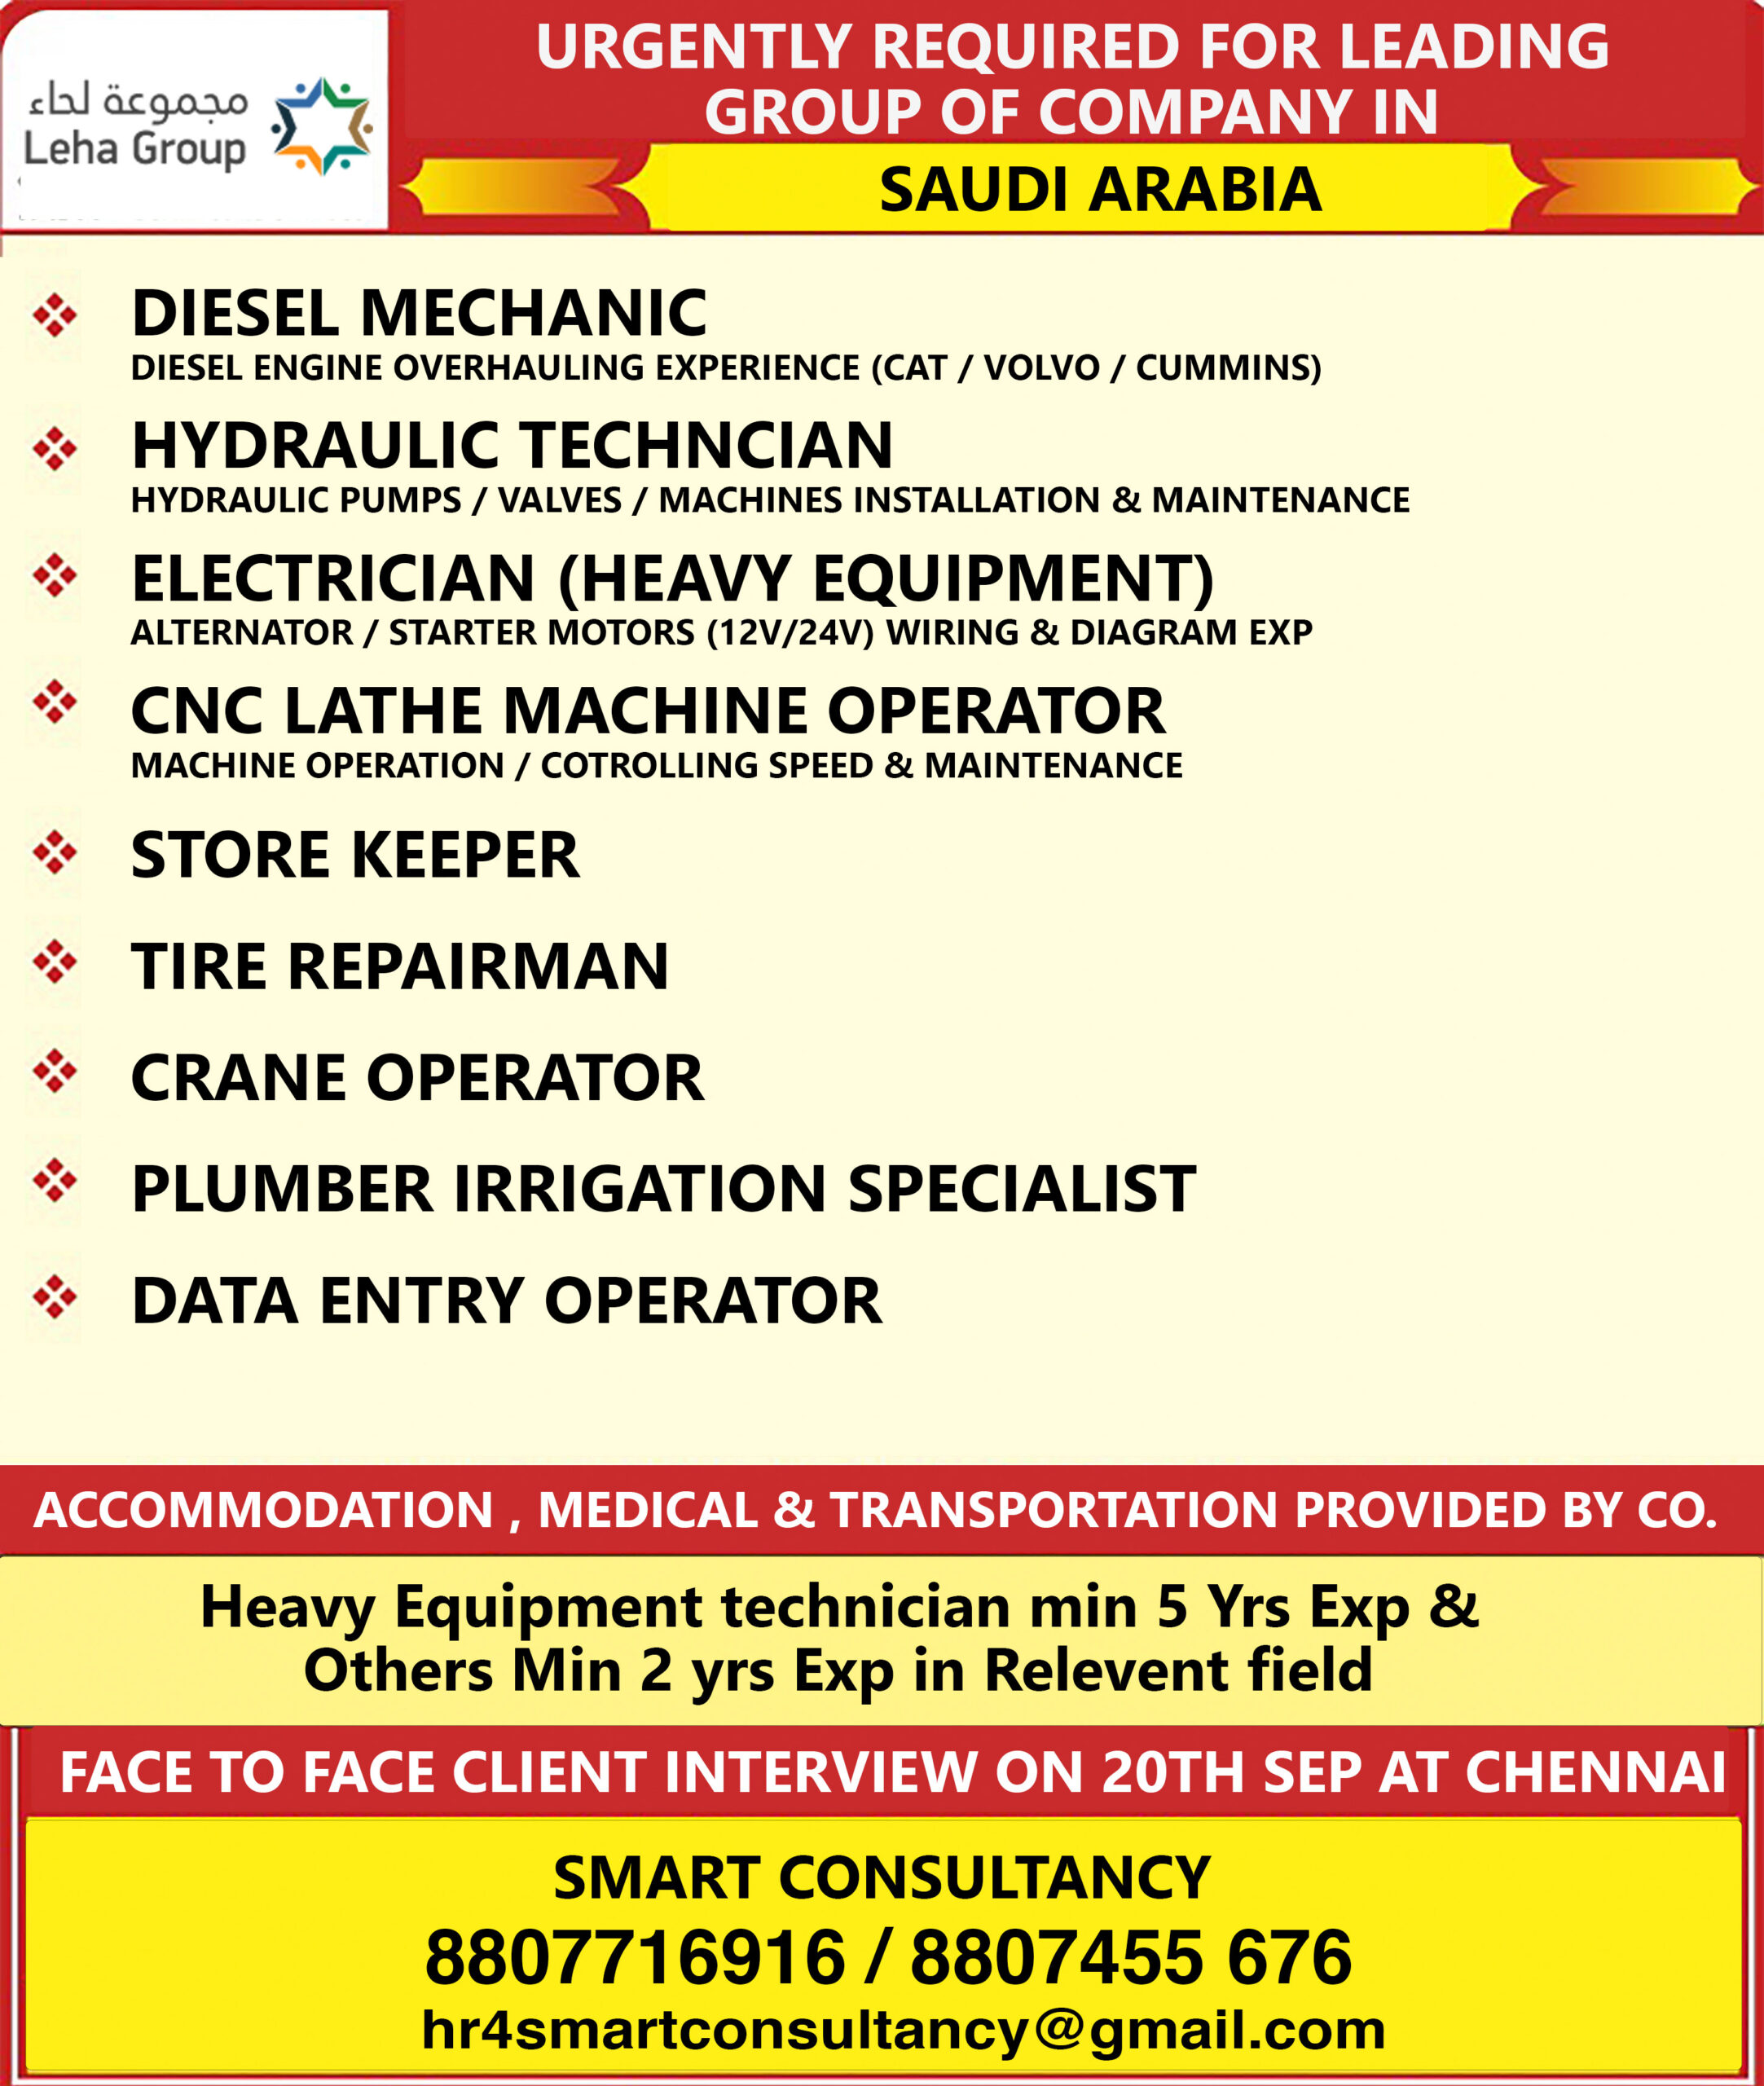 FACE TO FACE CLIENT INTERVIEW ON 20TH SEP AT CHENNAI